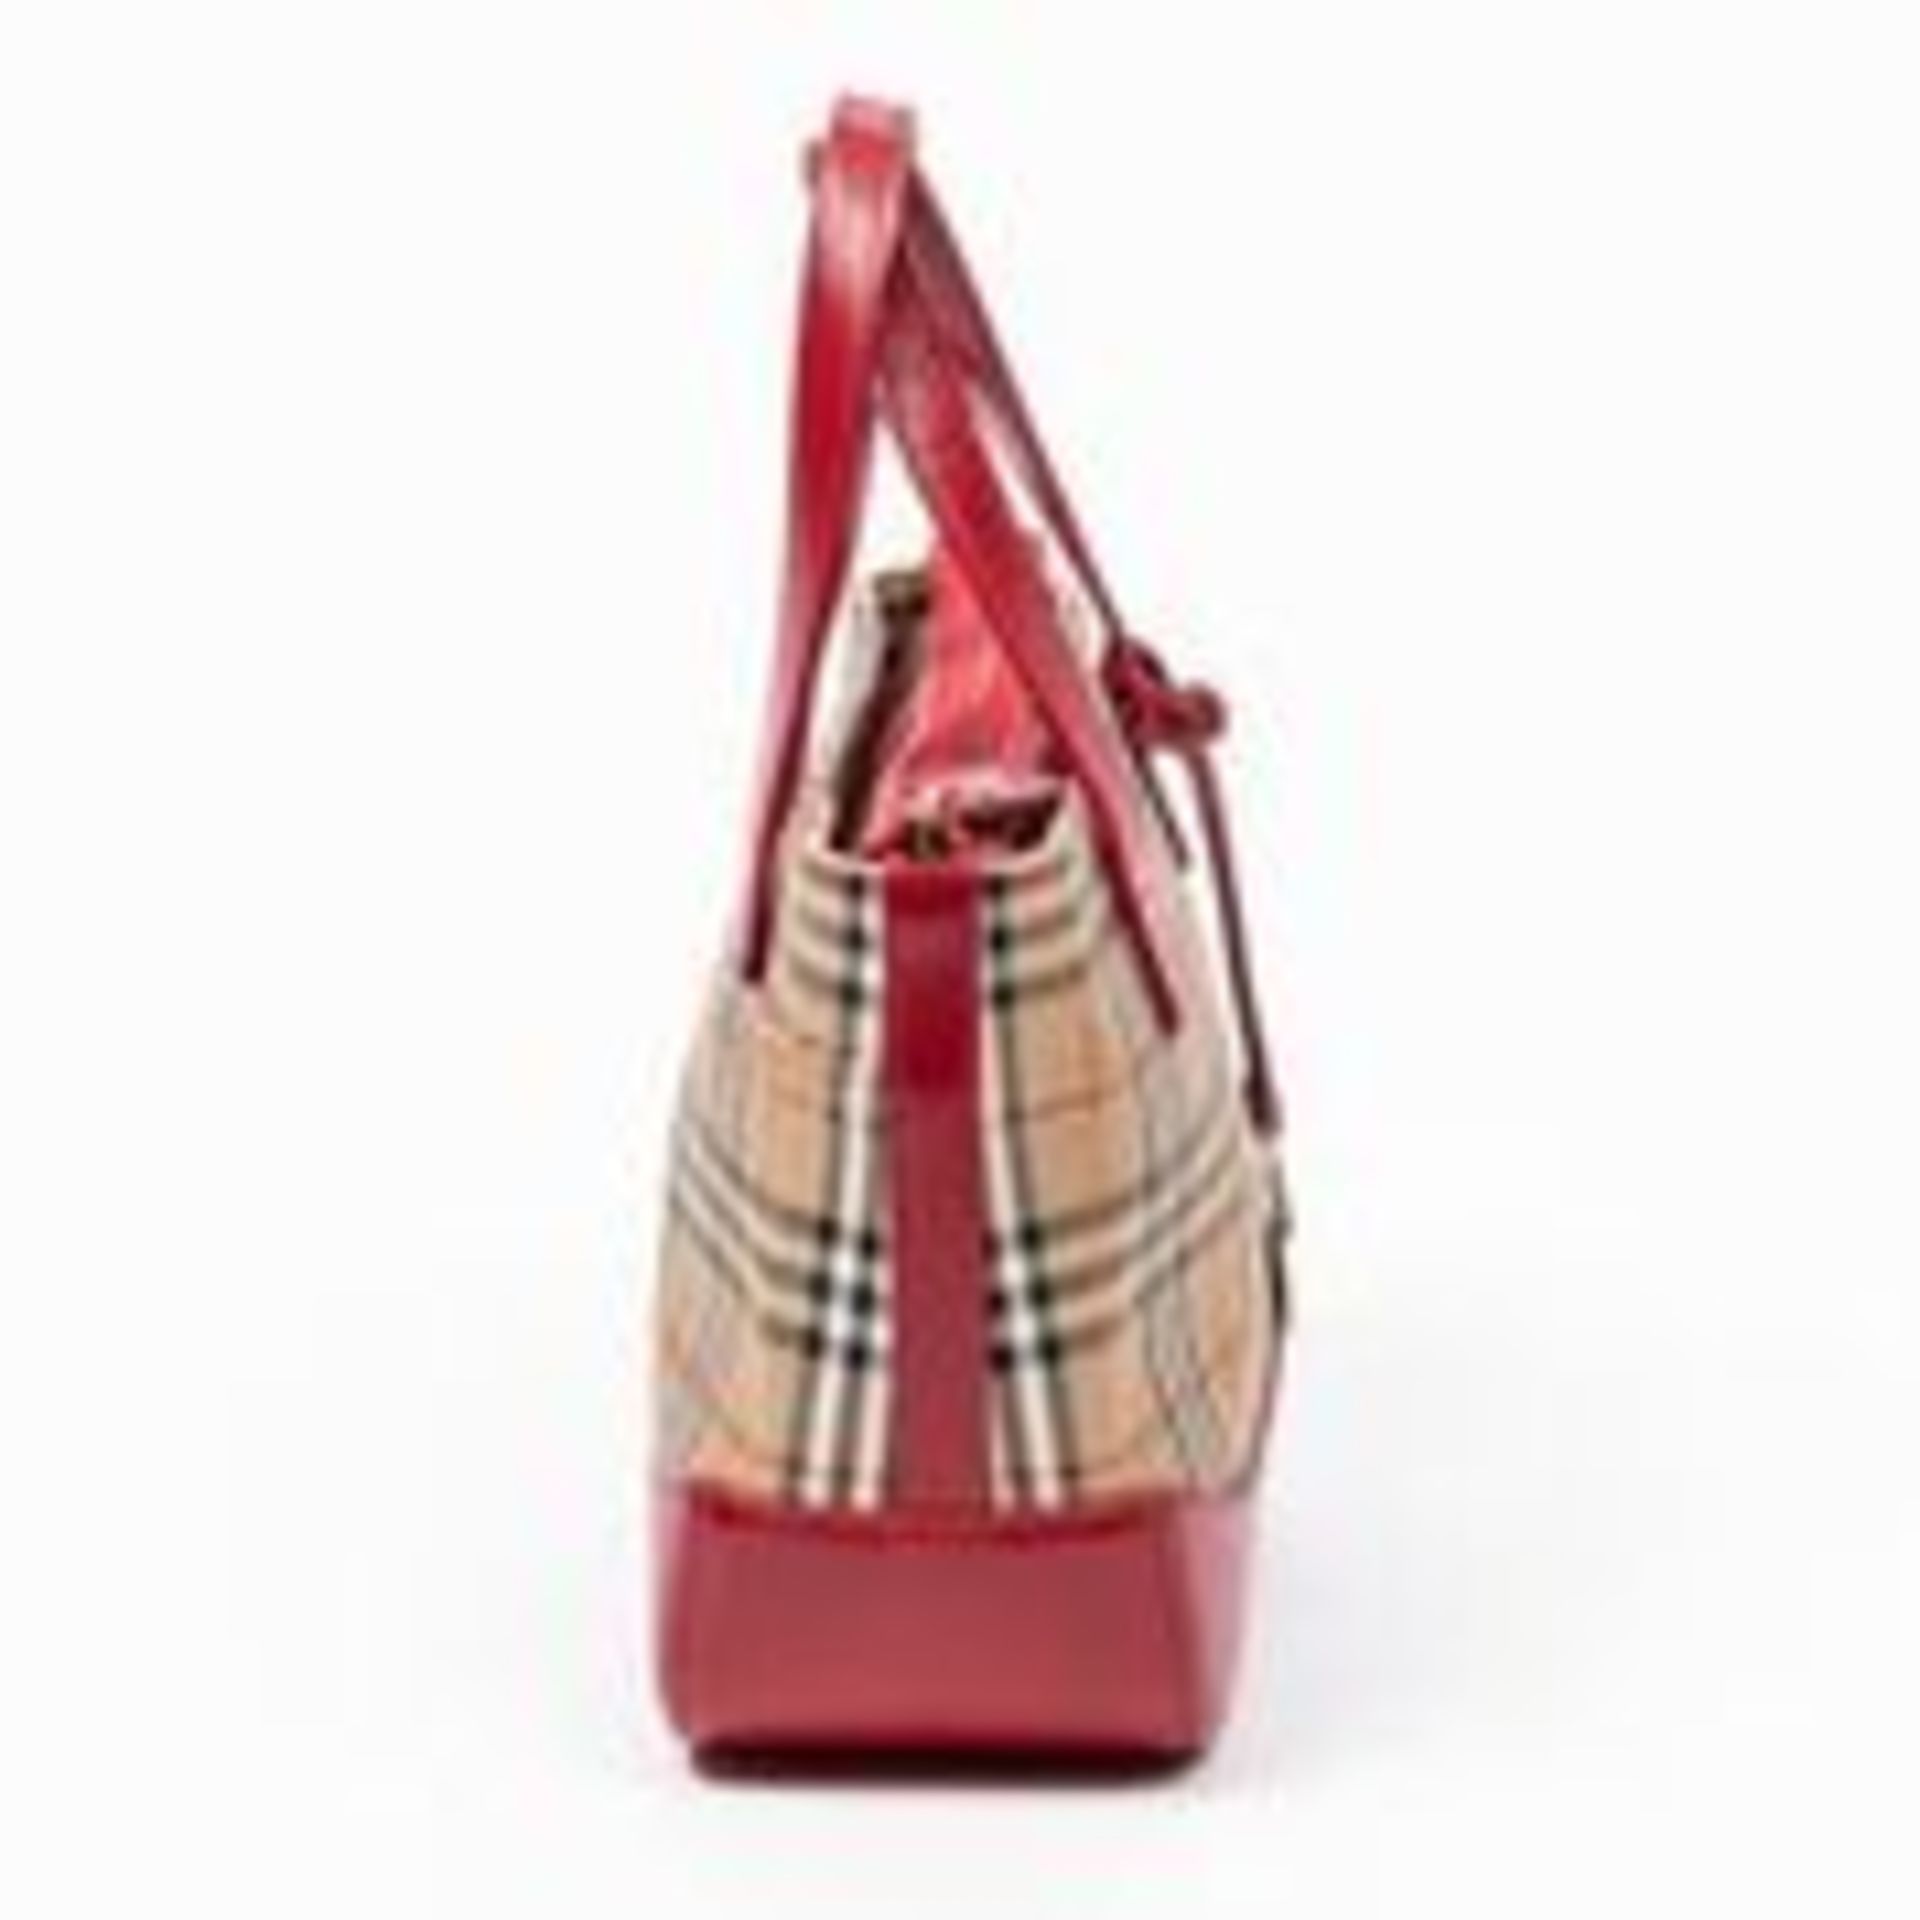 RRP £355 Burberry Mini Zip Handbag In Beige/Red AAP8638 (Bags Are Not On Site, Please Email For - Image 3 of 6